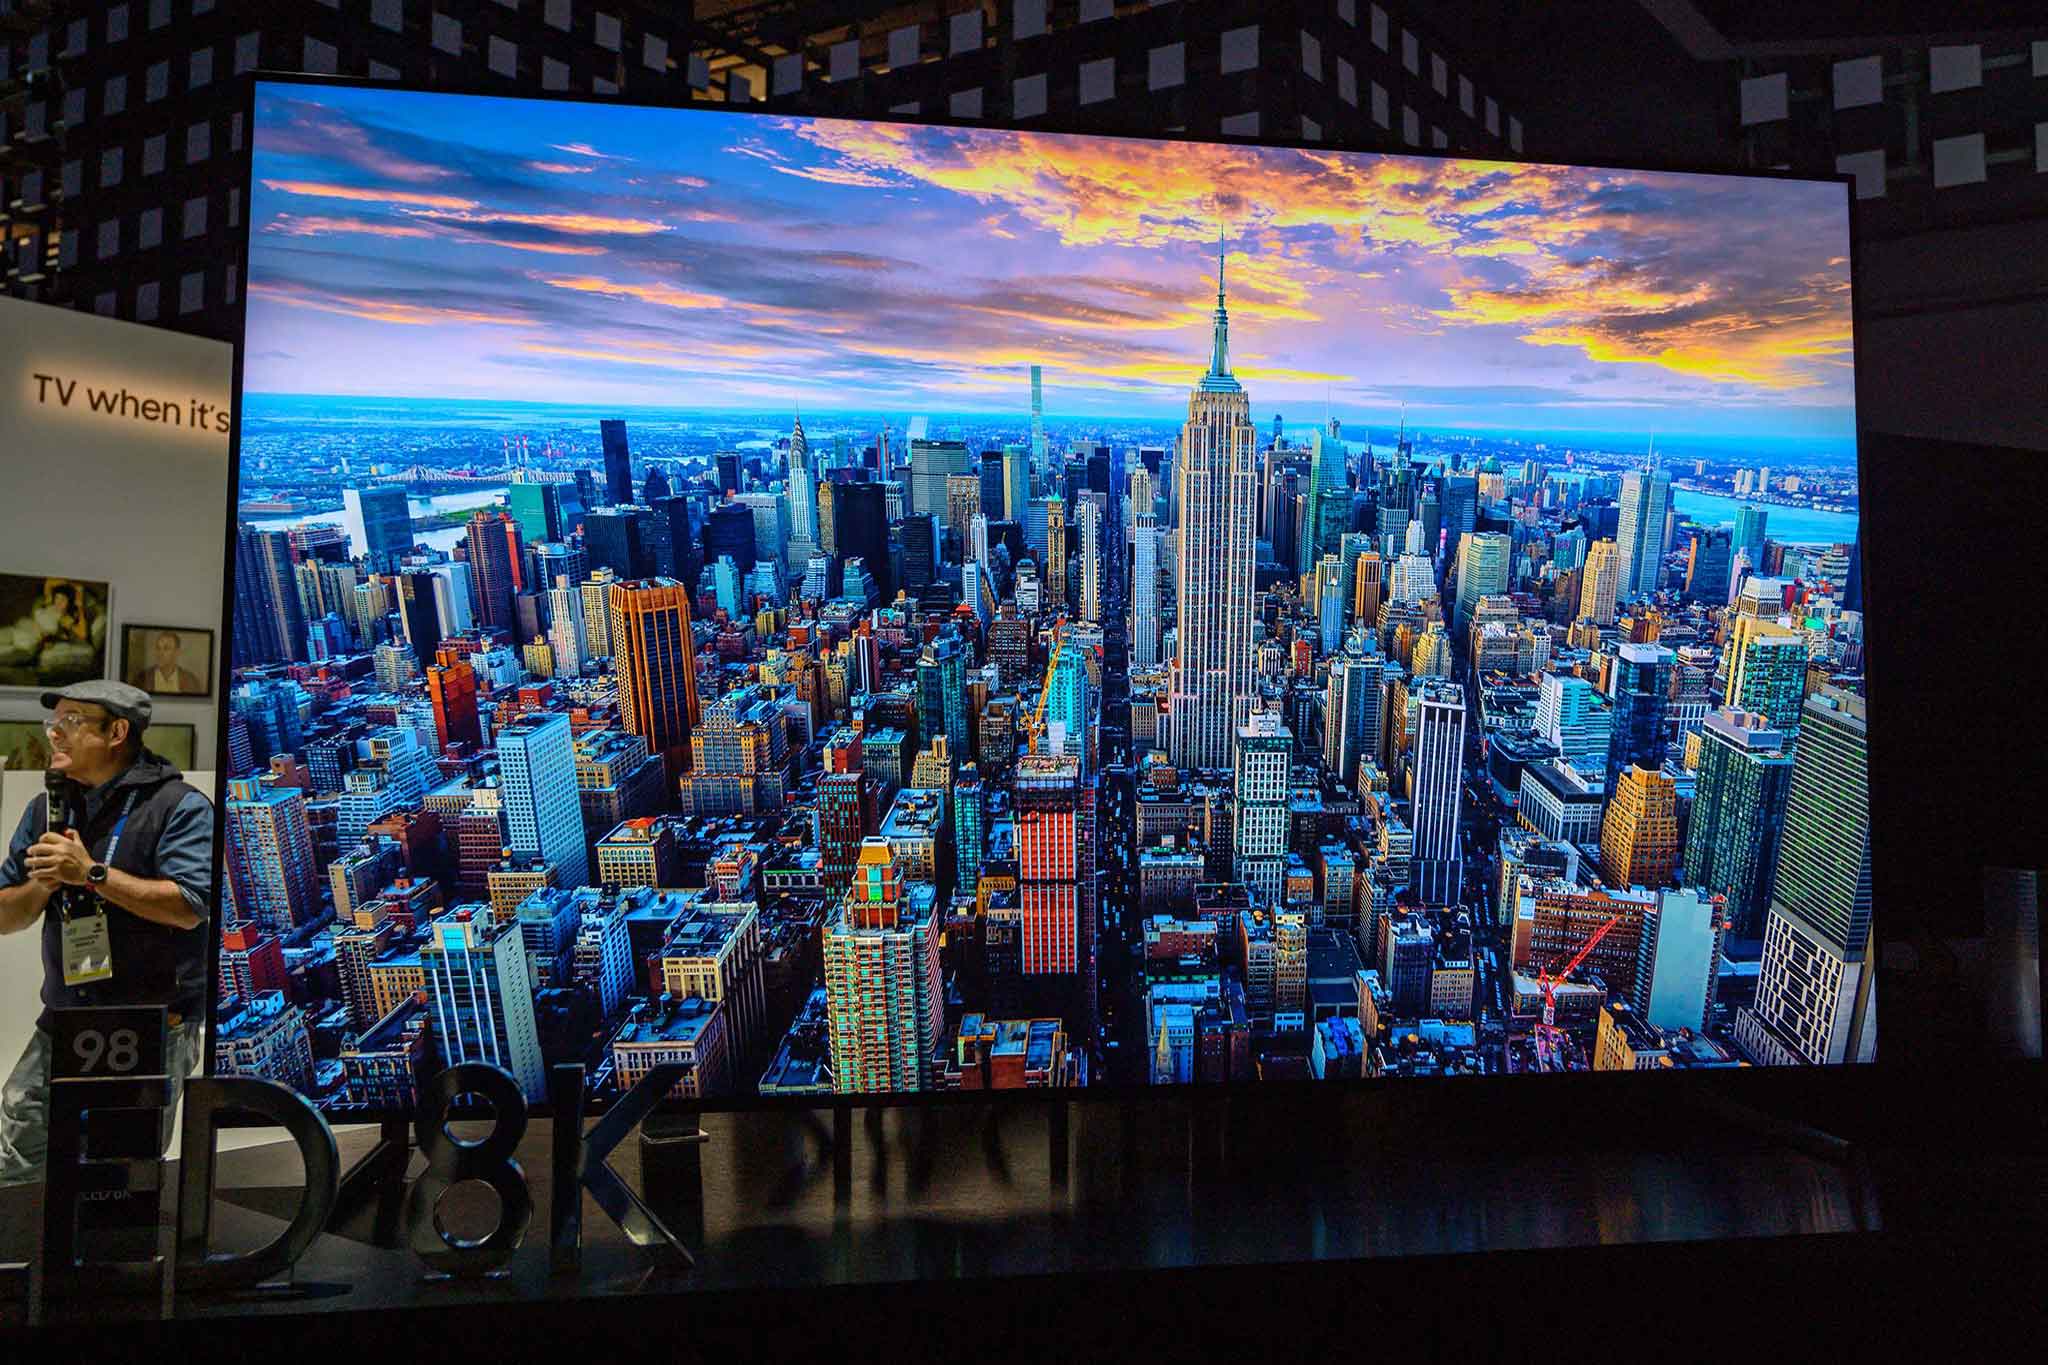 Omhoog Caroline Toevlucht Samsung QLED 8K TV With 98-inch big display announced at CES 2019